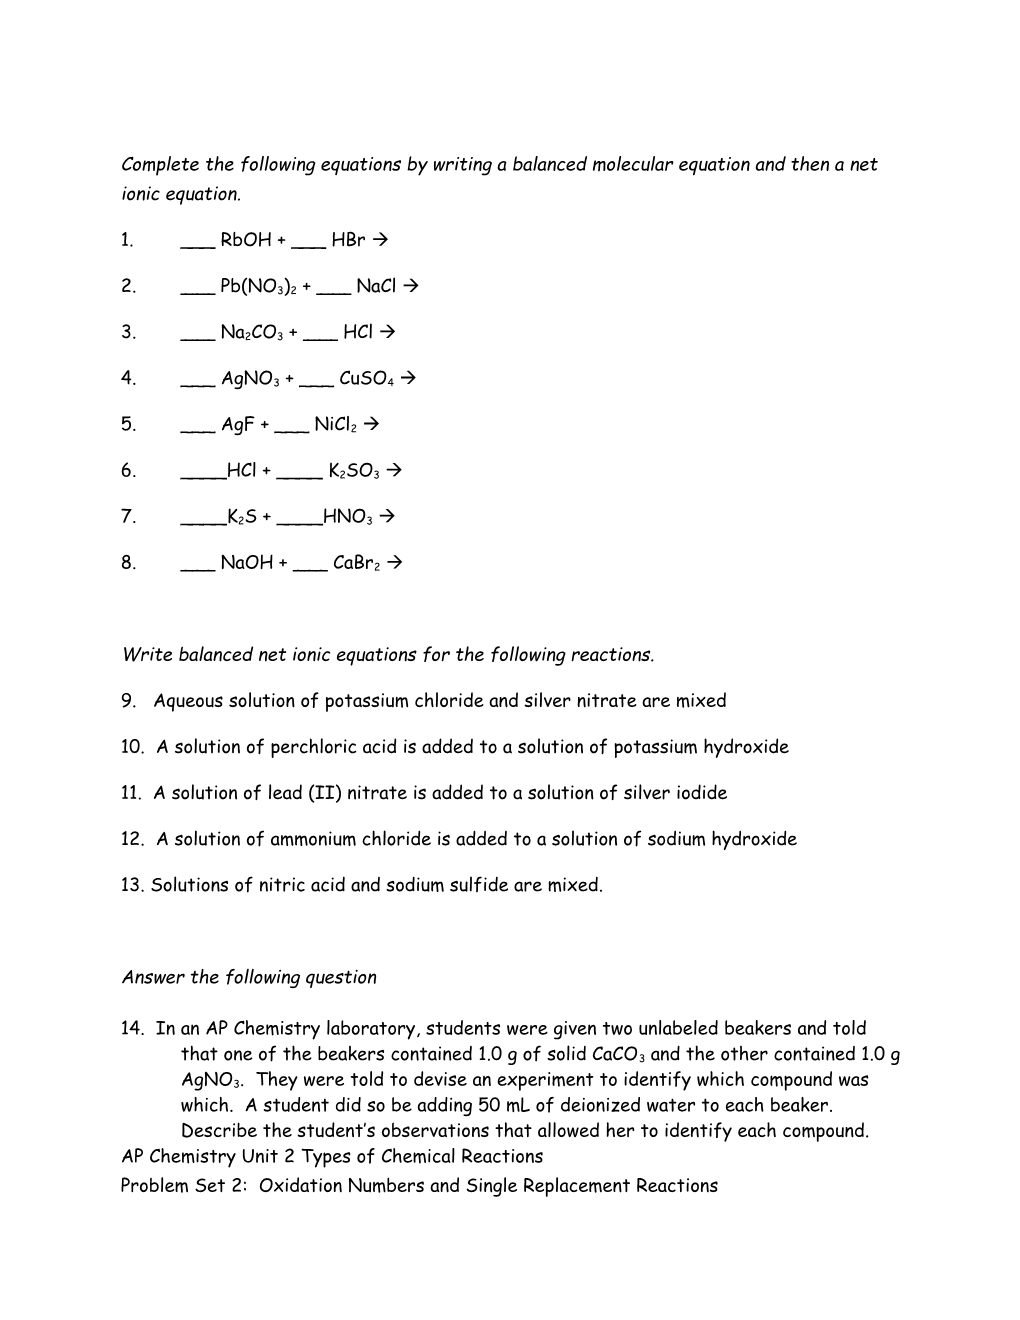 Write Balanced Net Ionic Equations for the Following Reactions